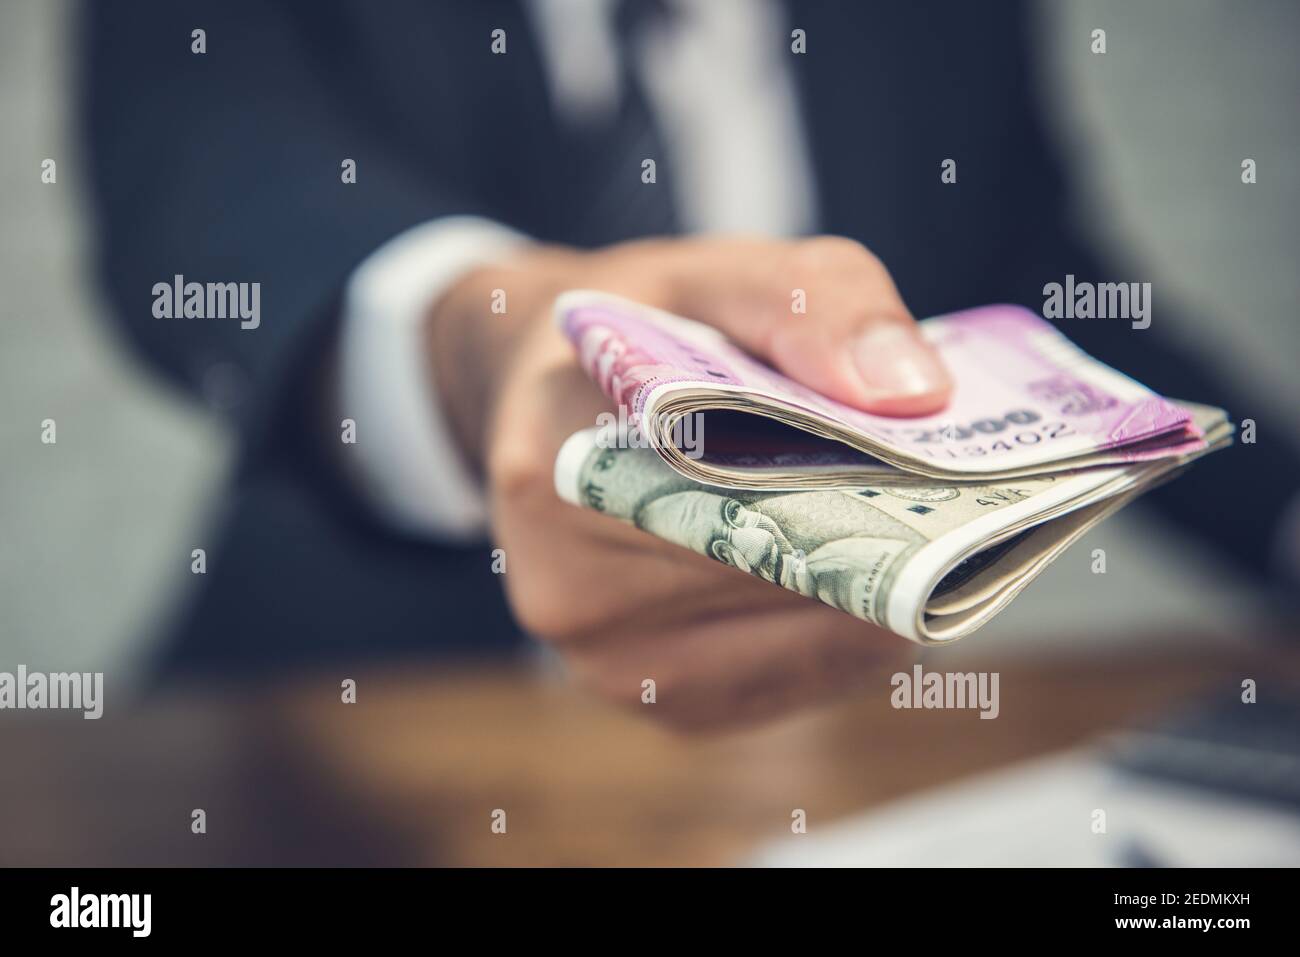 Businessman giving money in the form of Indian Rupees currency for services rendered Stock Photo